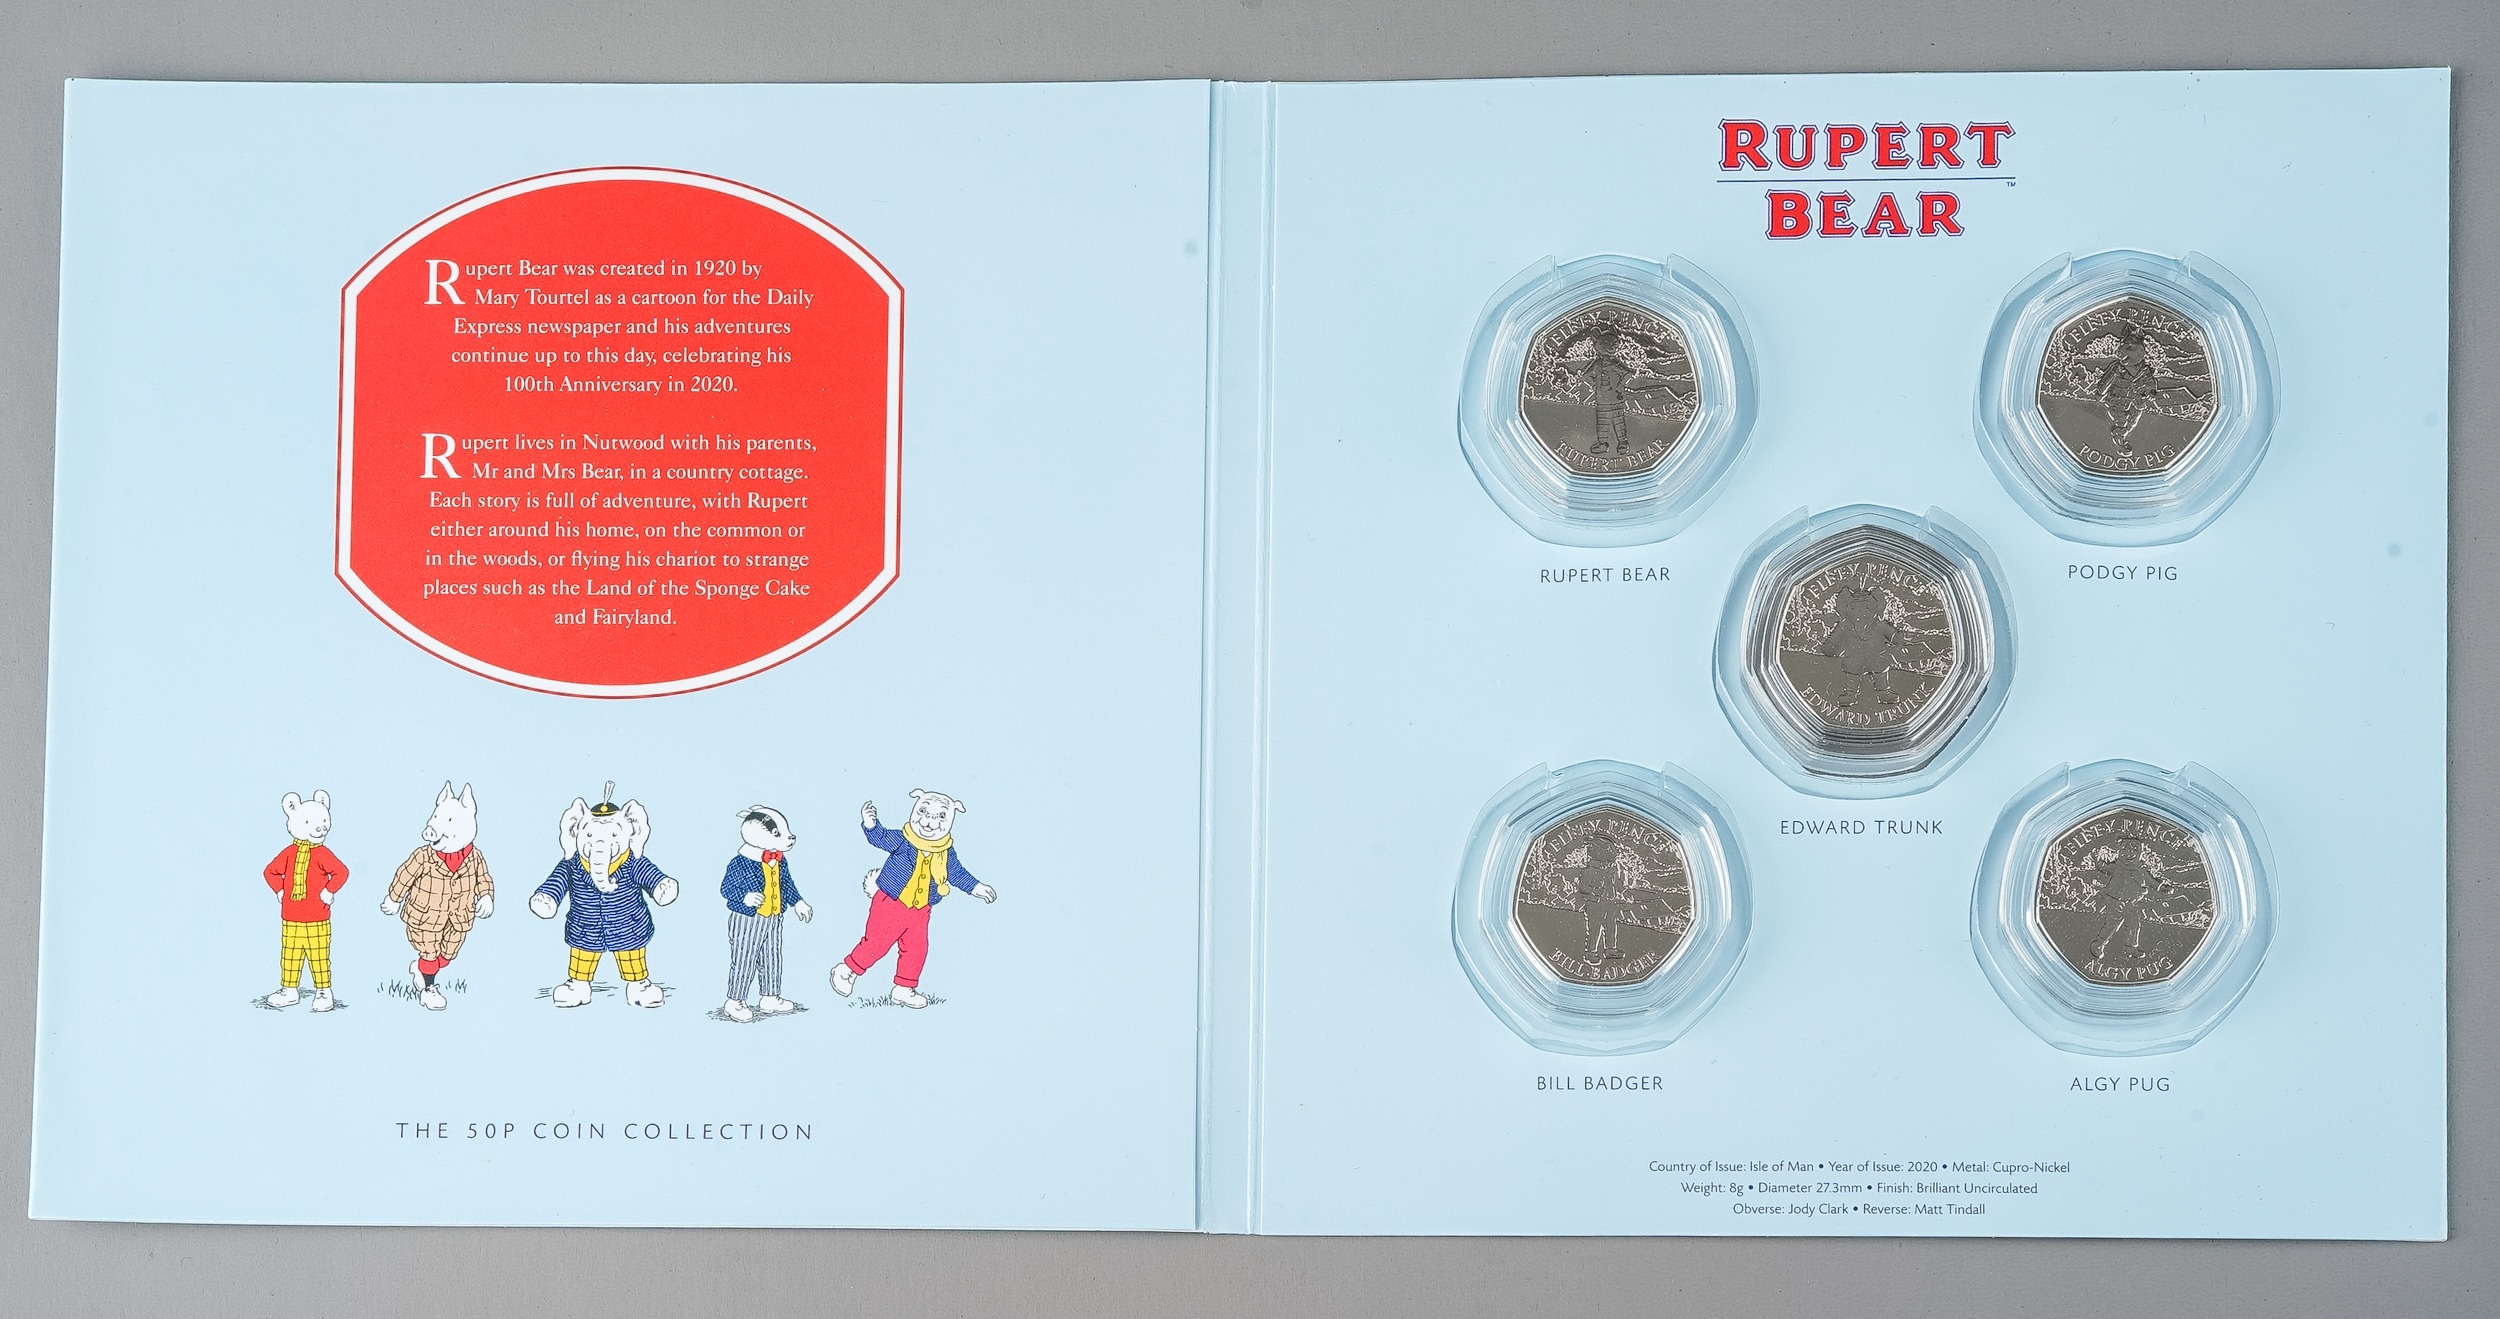 Rupert Bear: The 50p Coin Collection, with five encapsulated coins, comprising 'Rupert bear', 'Podgy